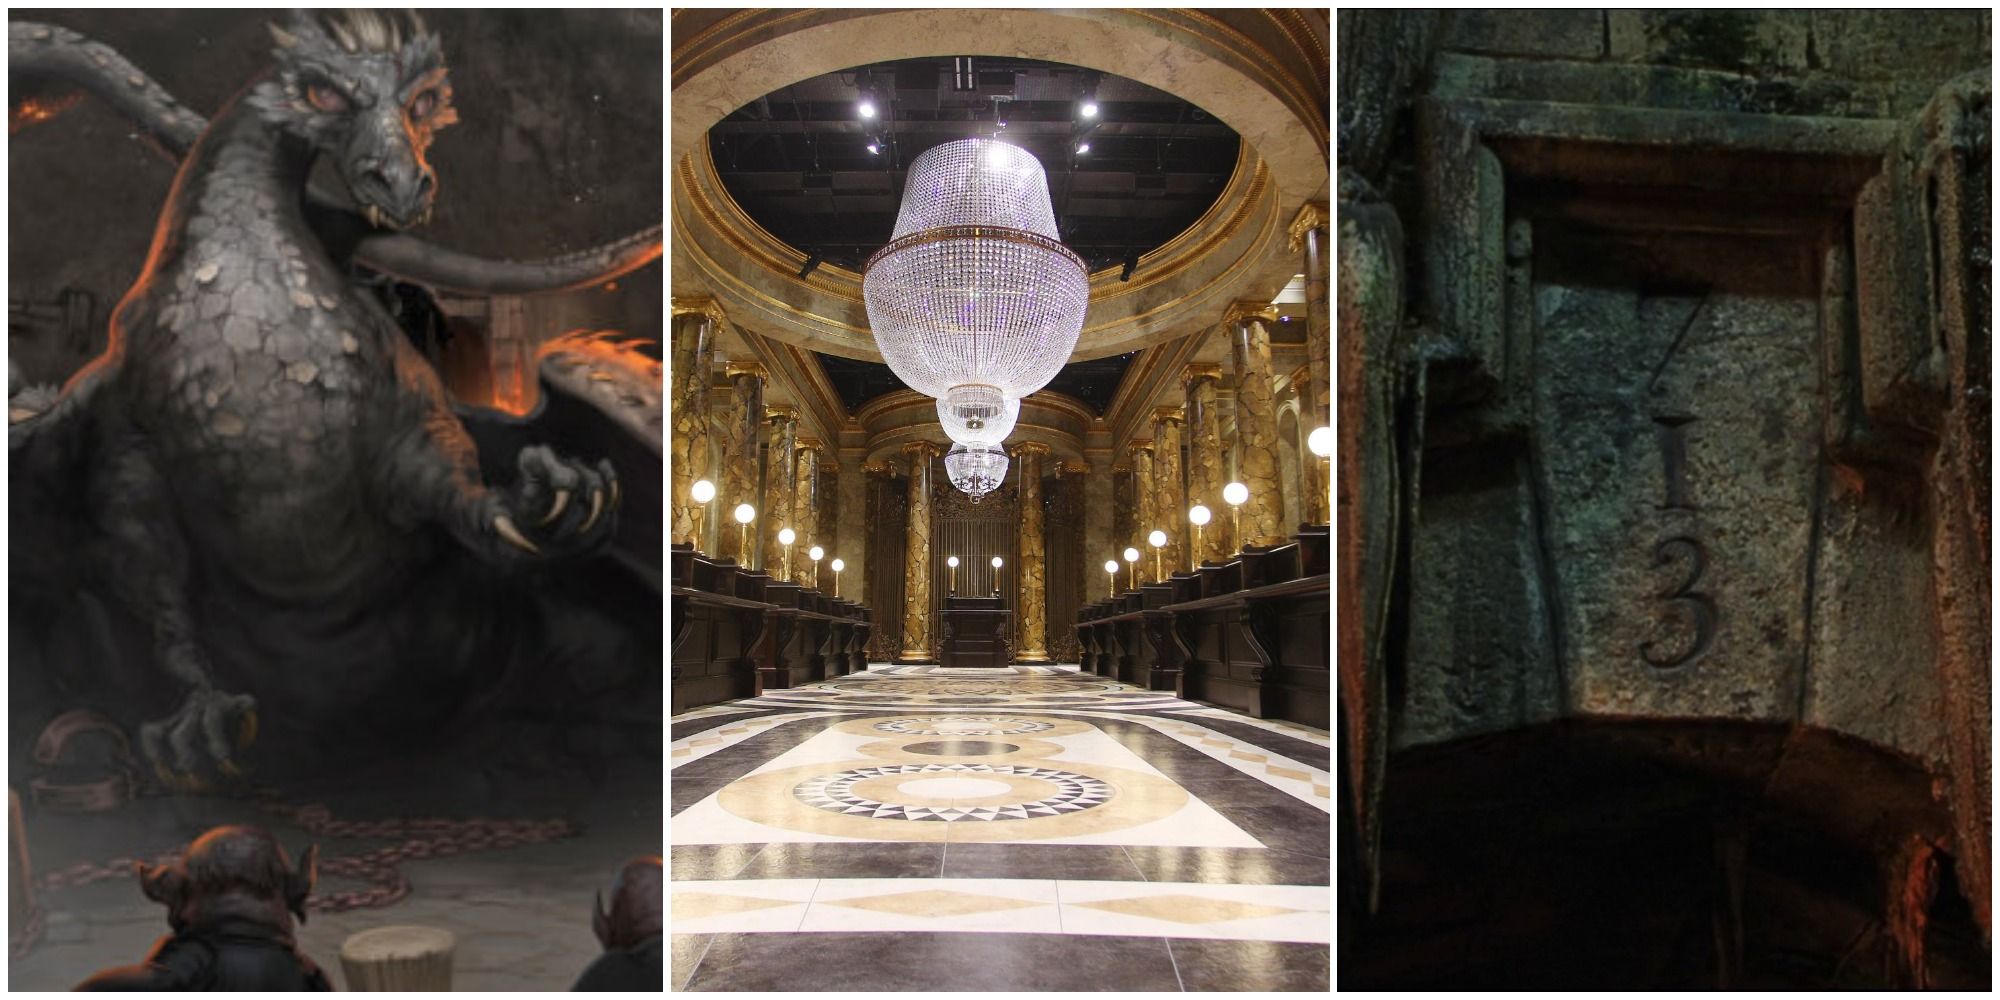 Harry Potter 10 Things About Gringotts Wizarding Bank (That Even Hardcore Fans Don’t Know)